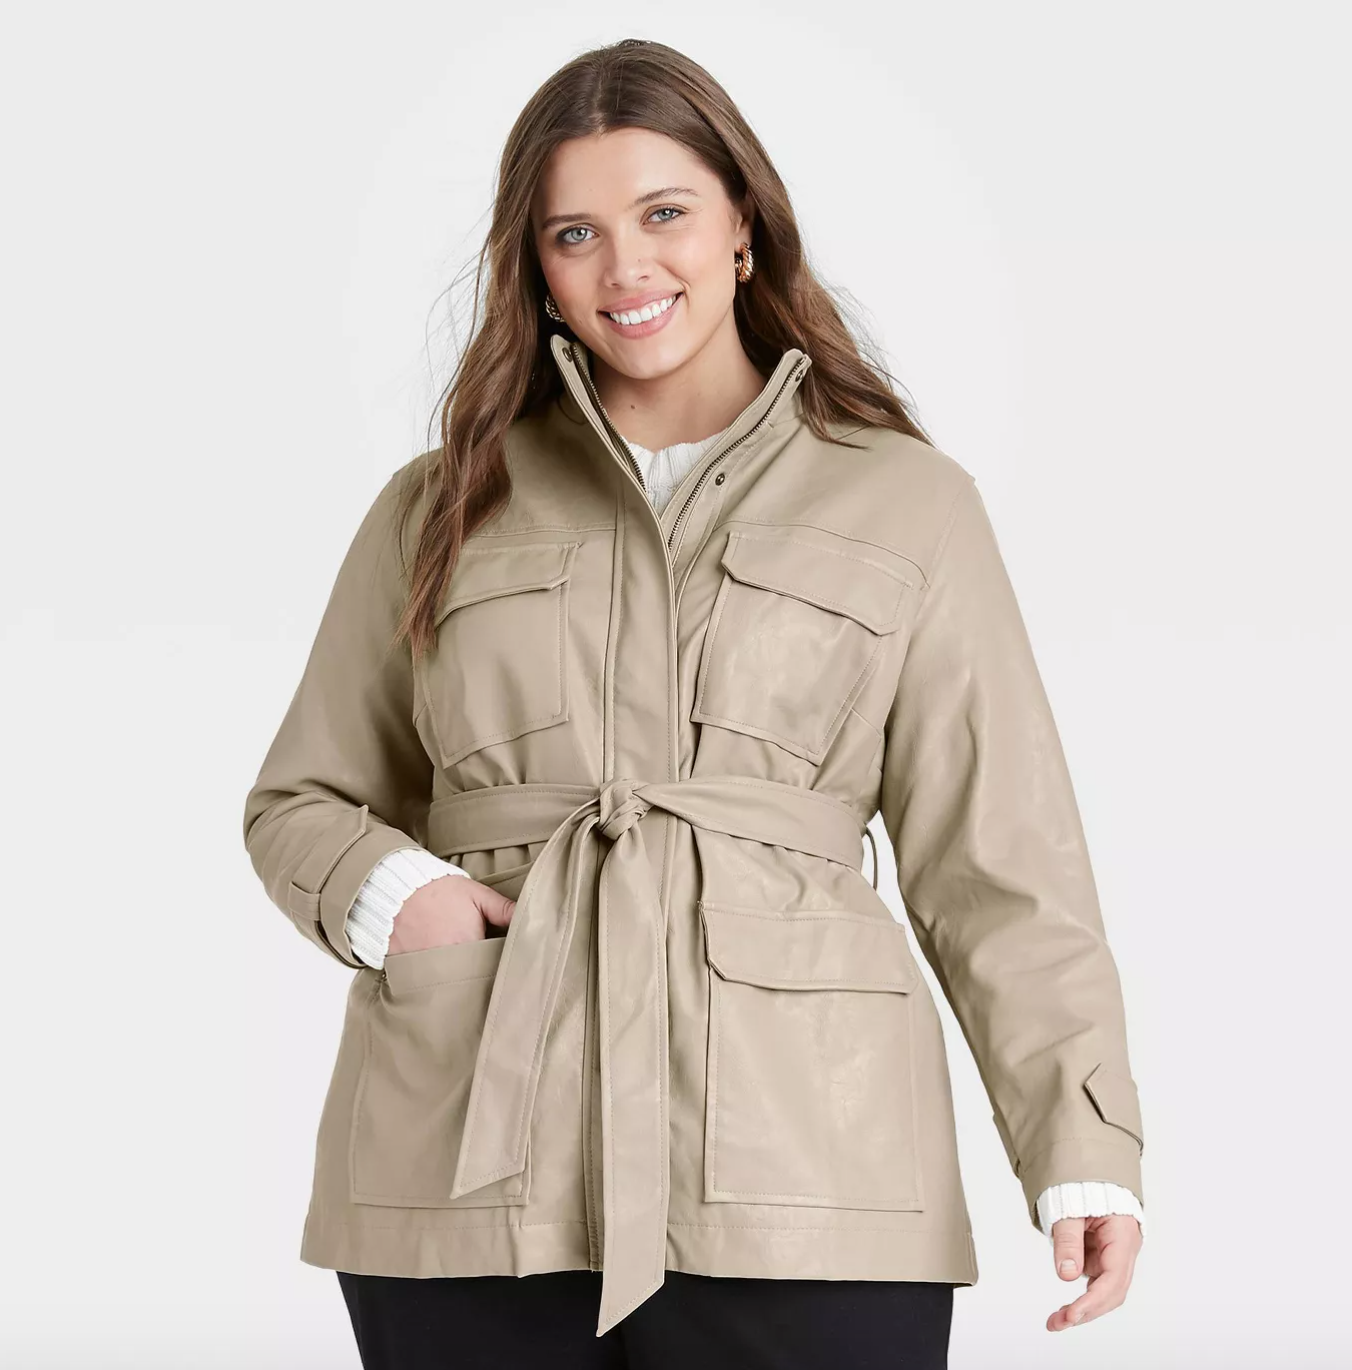 The Plus Project Ladies Womens Lightweight Relaxed Casual Trench Jacket 